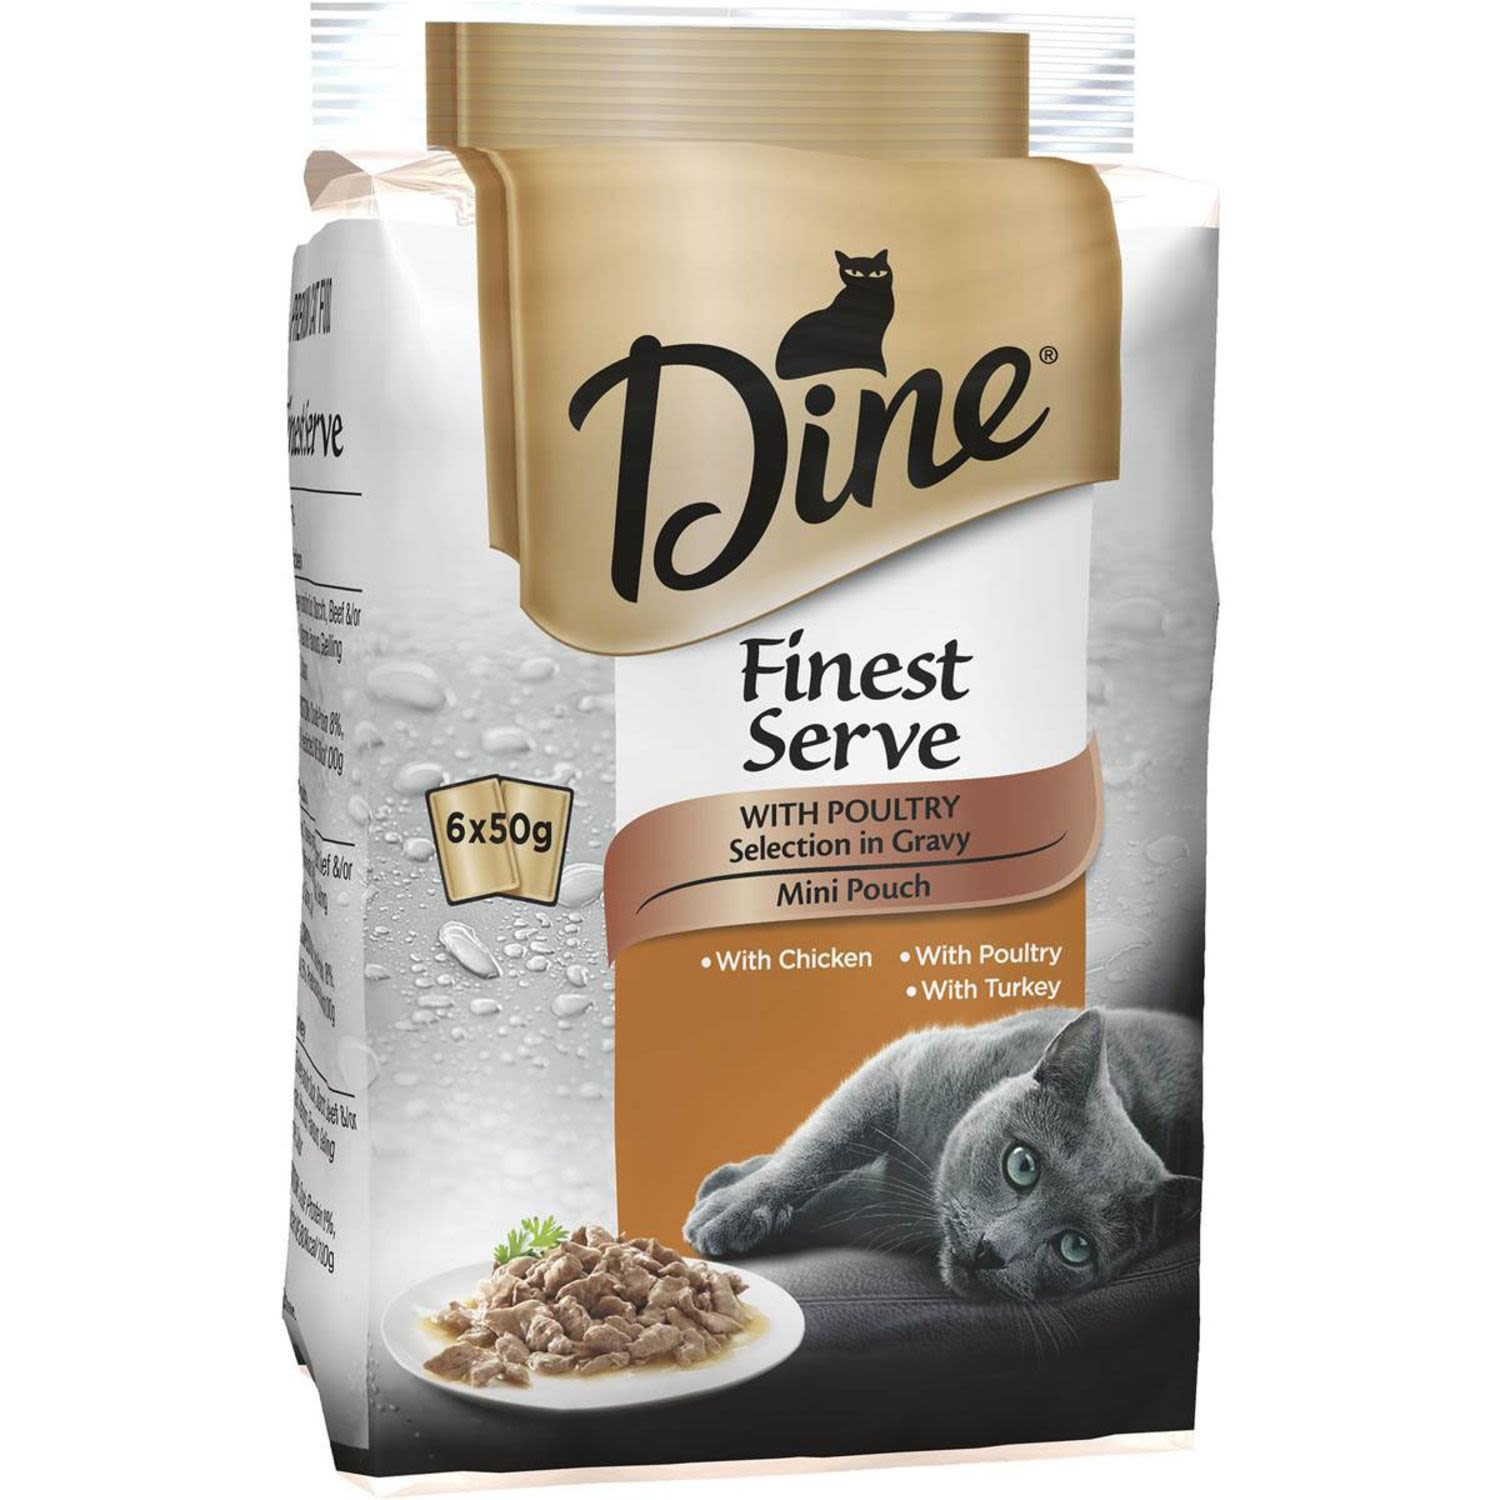 Dine Finest Serve With Poultry Selection In Gravy Mini Pouch, 6 Each